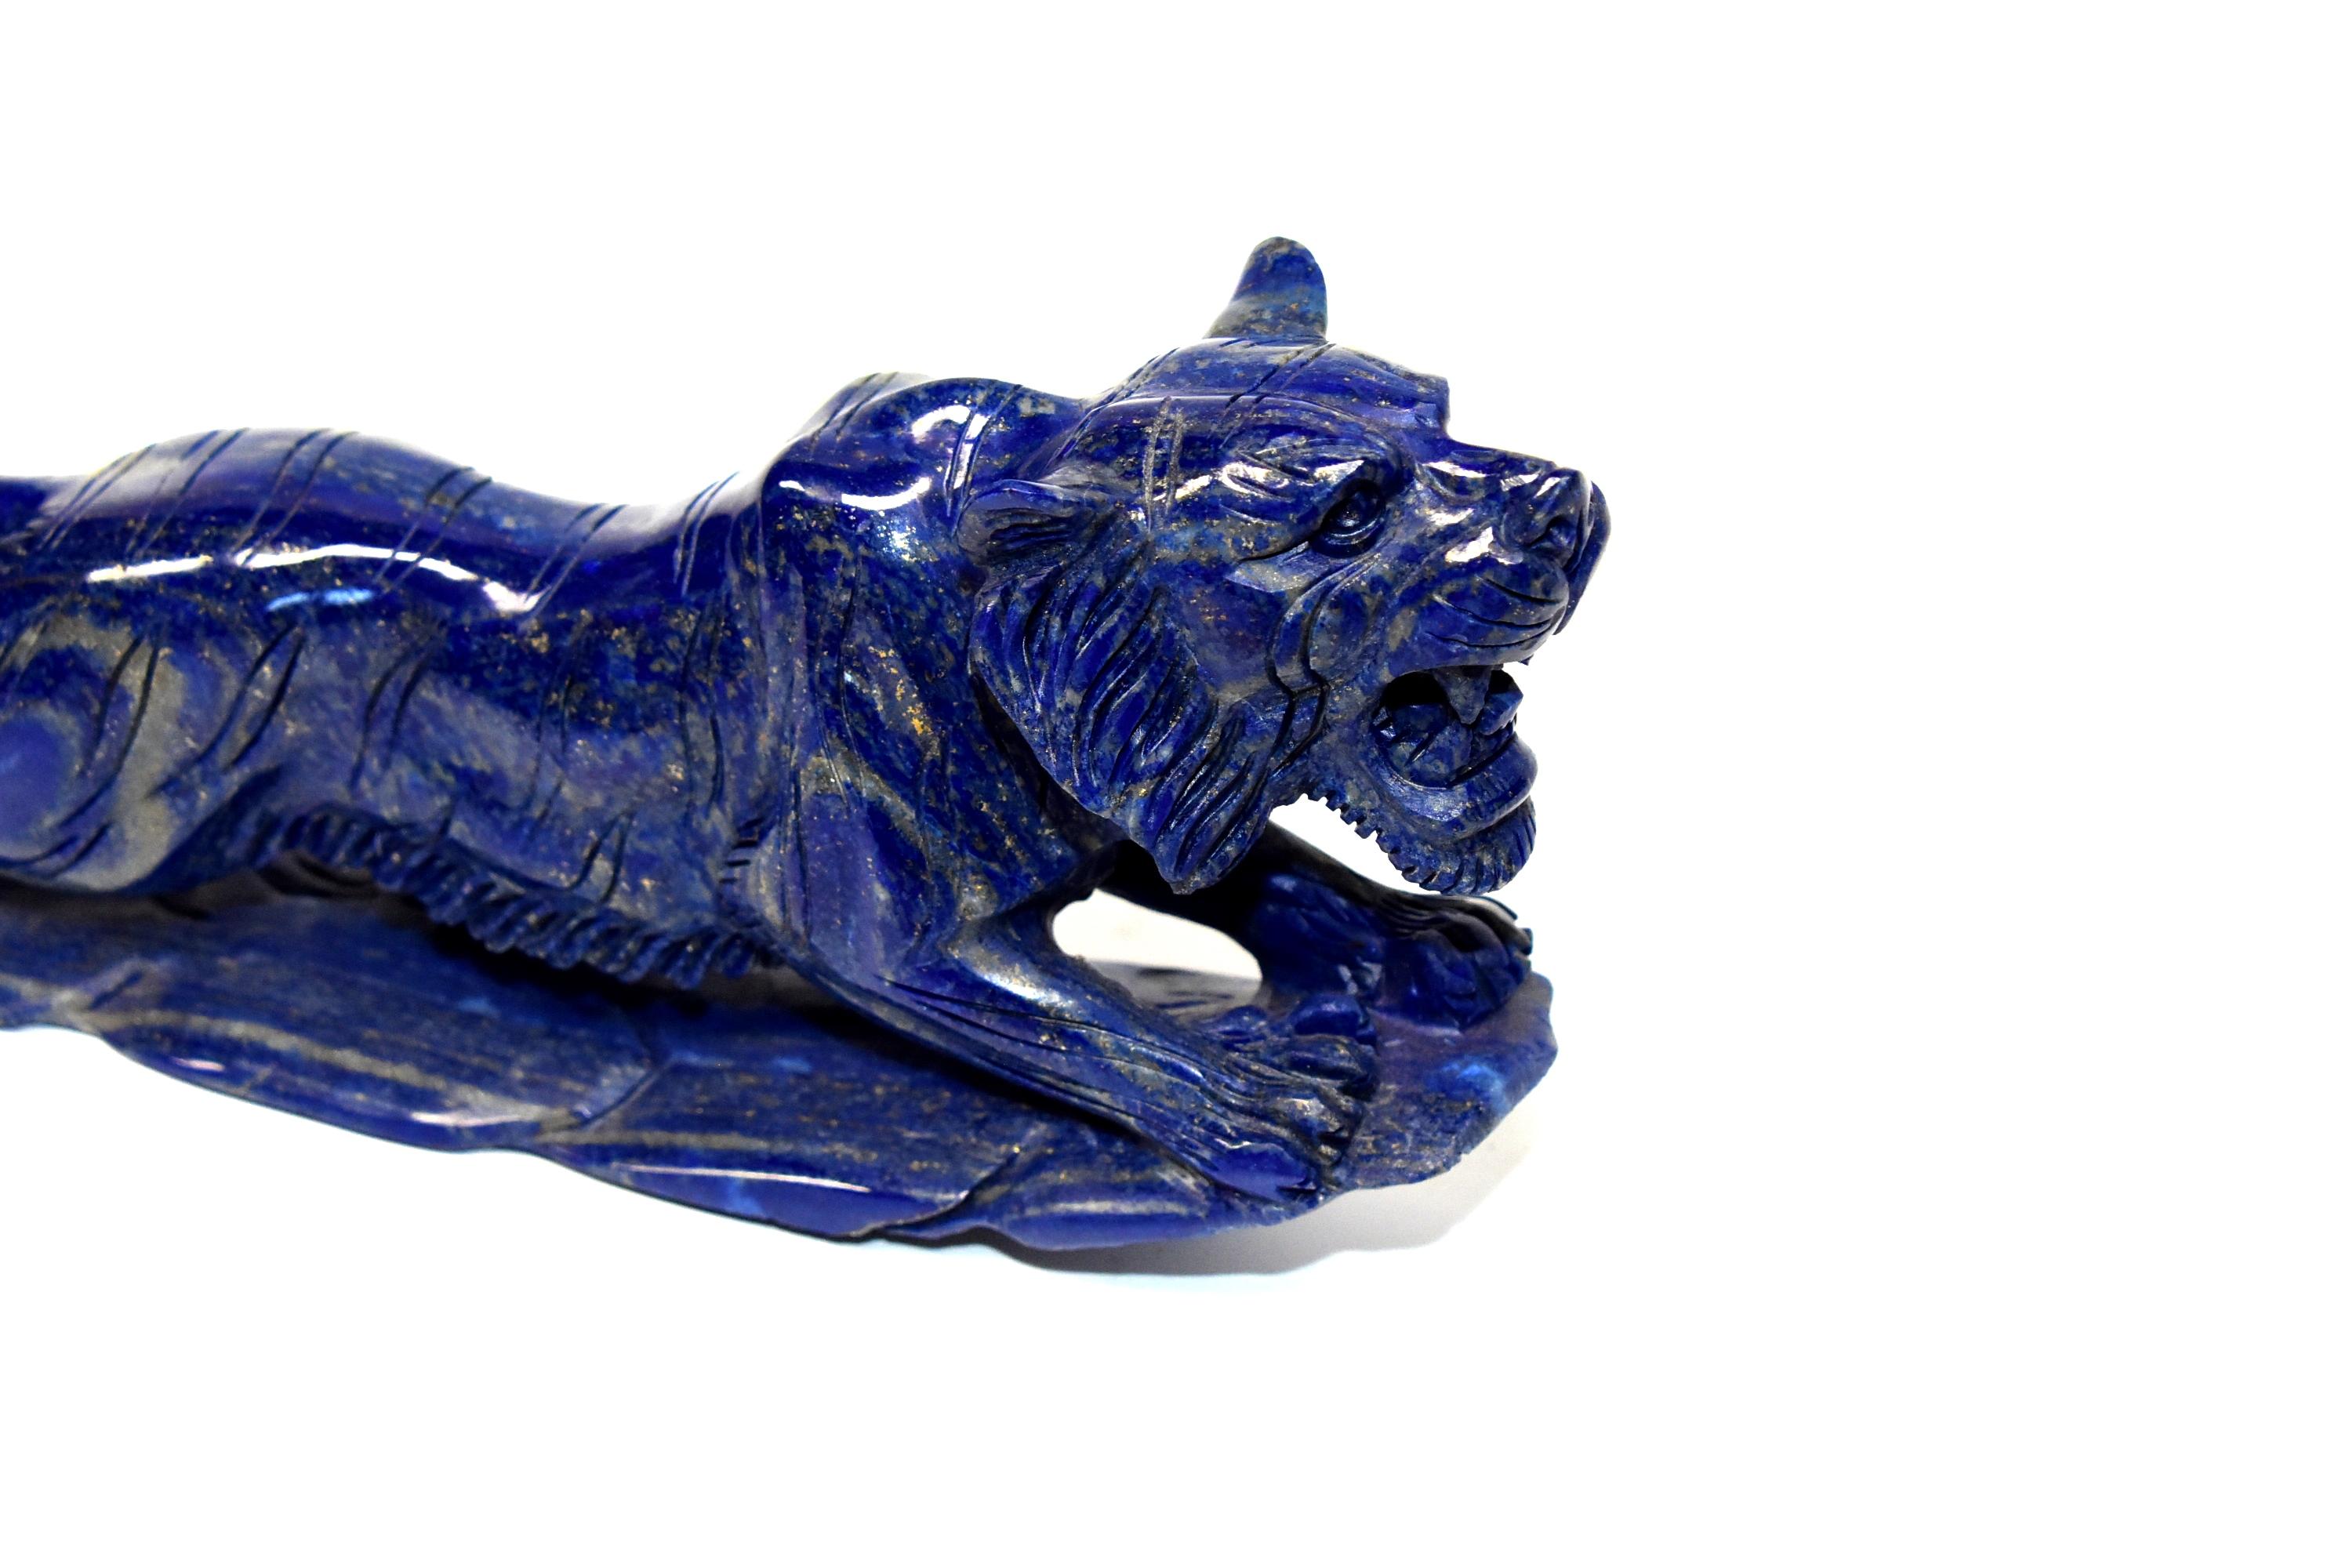 A beautiful all natural lapis lazuli tiger sculpture. The 2 lb stone's blue is bright and saturated with a violet hue, and beautiful glittering of gold. The great contrast of gold against the magnificent blue has a stunning visual effect. The beauty